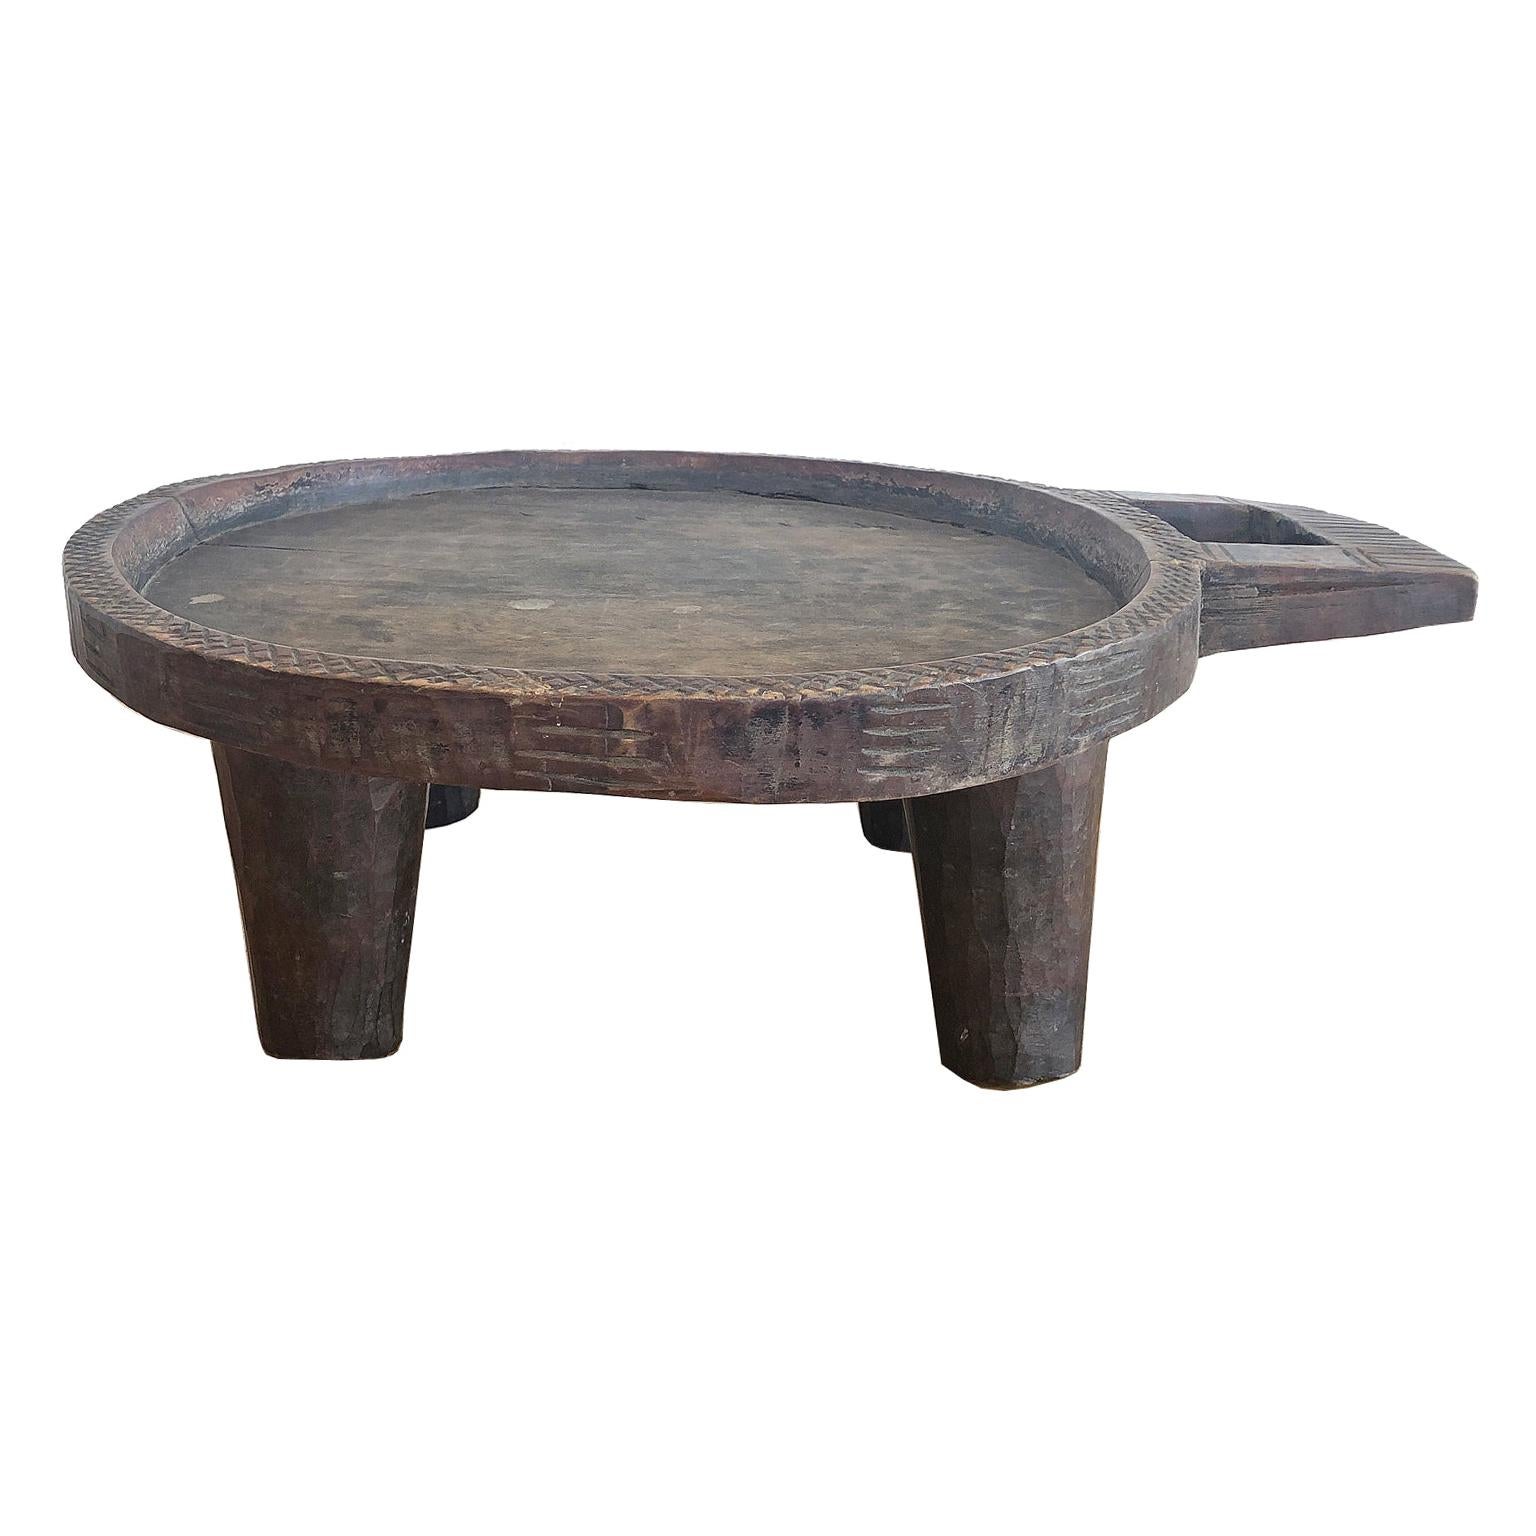 African Carved Wooden Coffee Tray from the Gurage Zone in Ethiopia